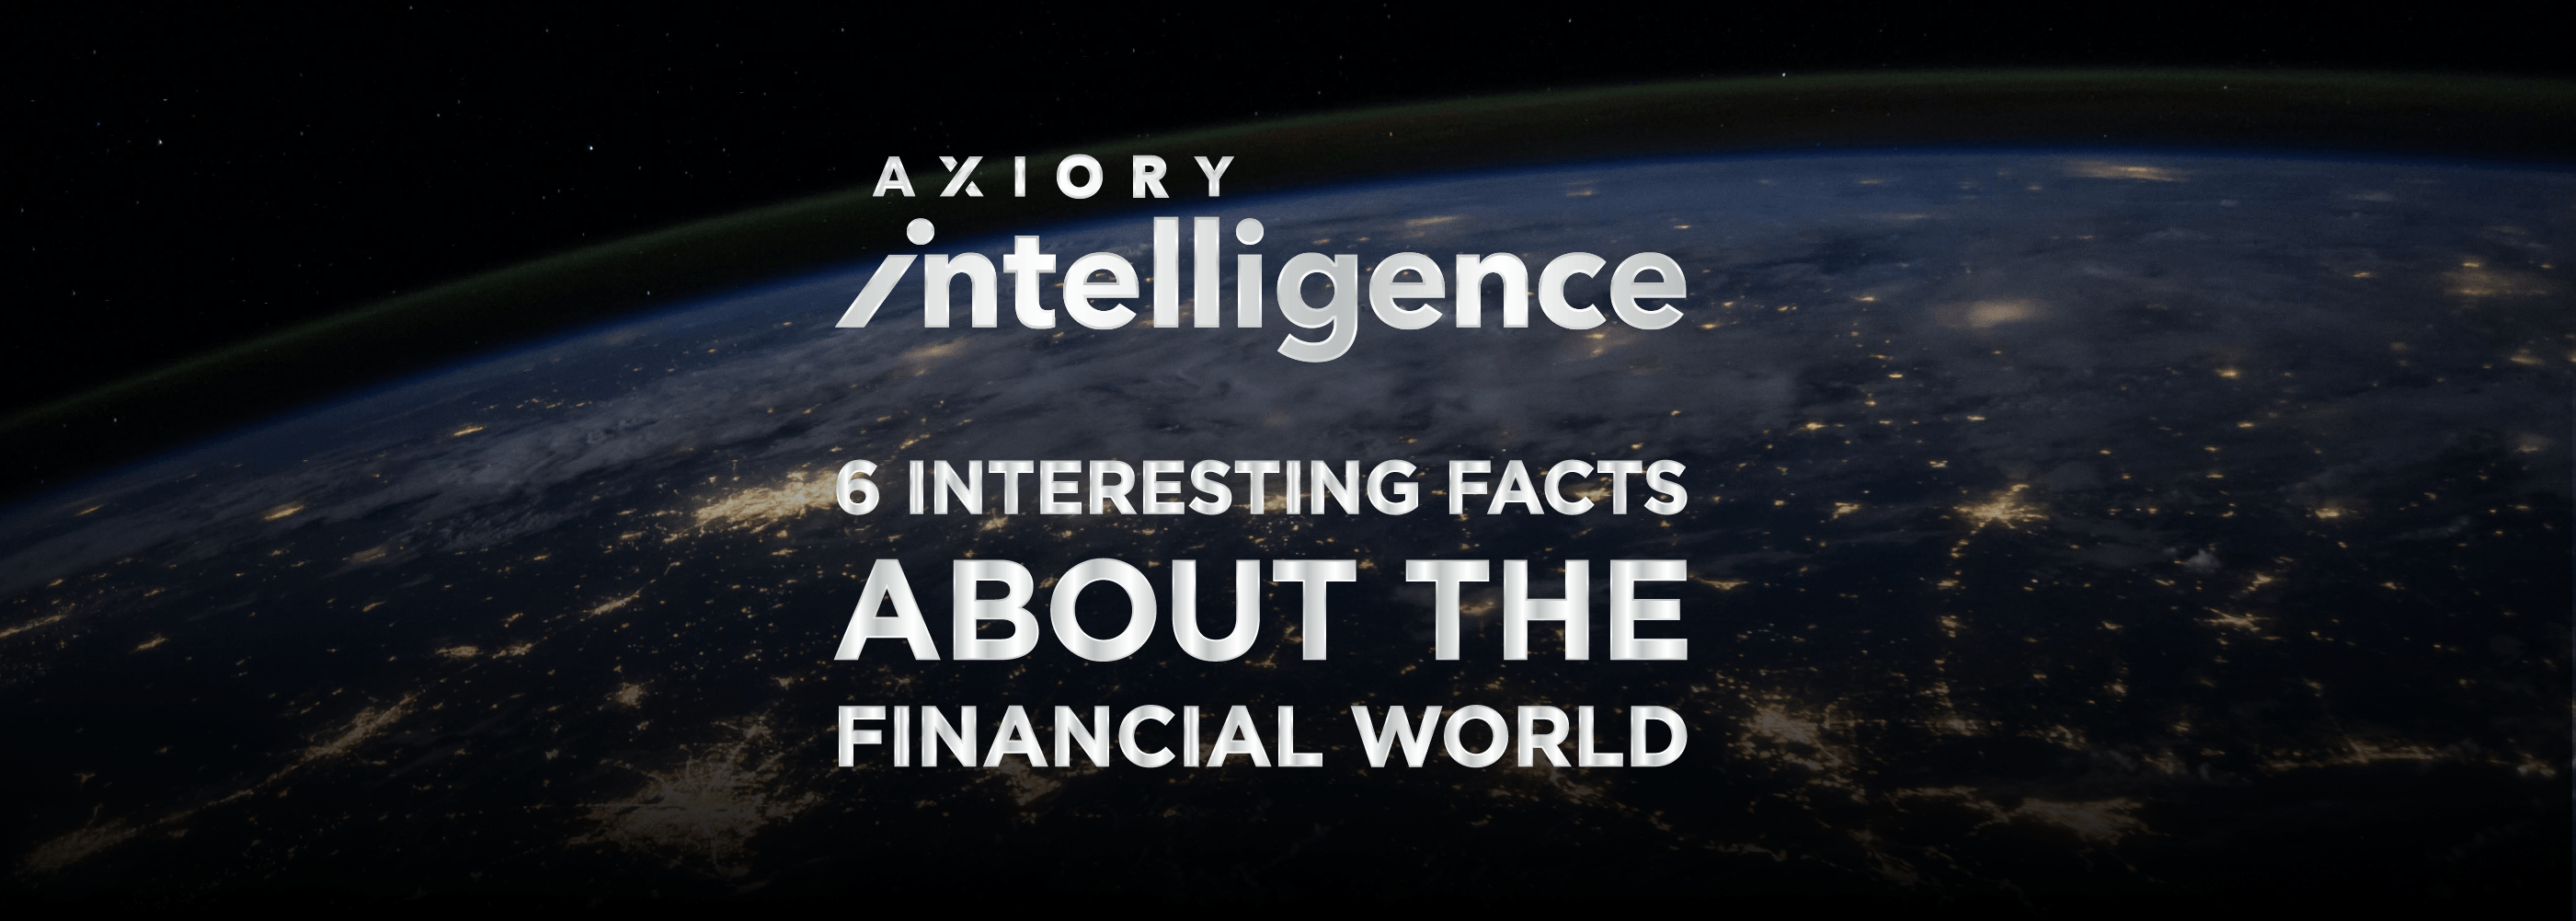 6 Interesting Facts about the Financial World